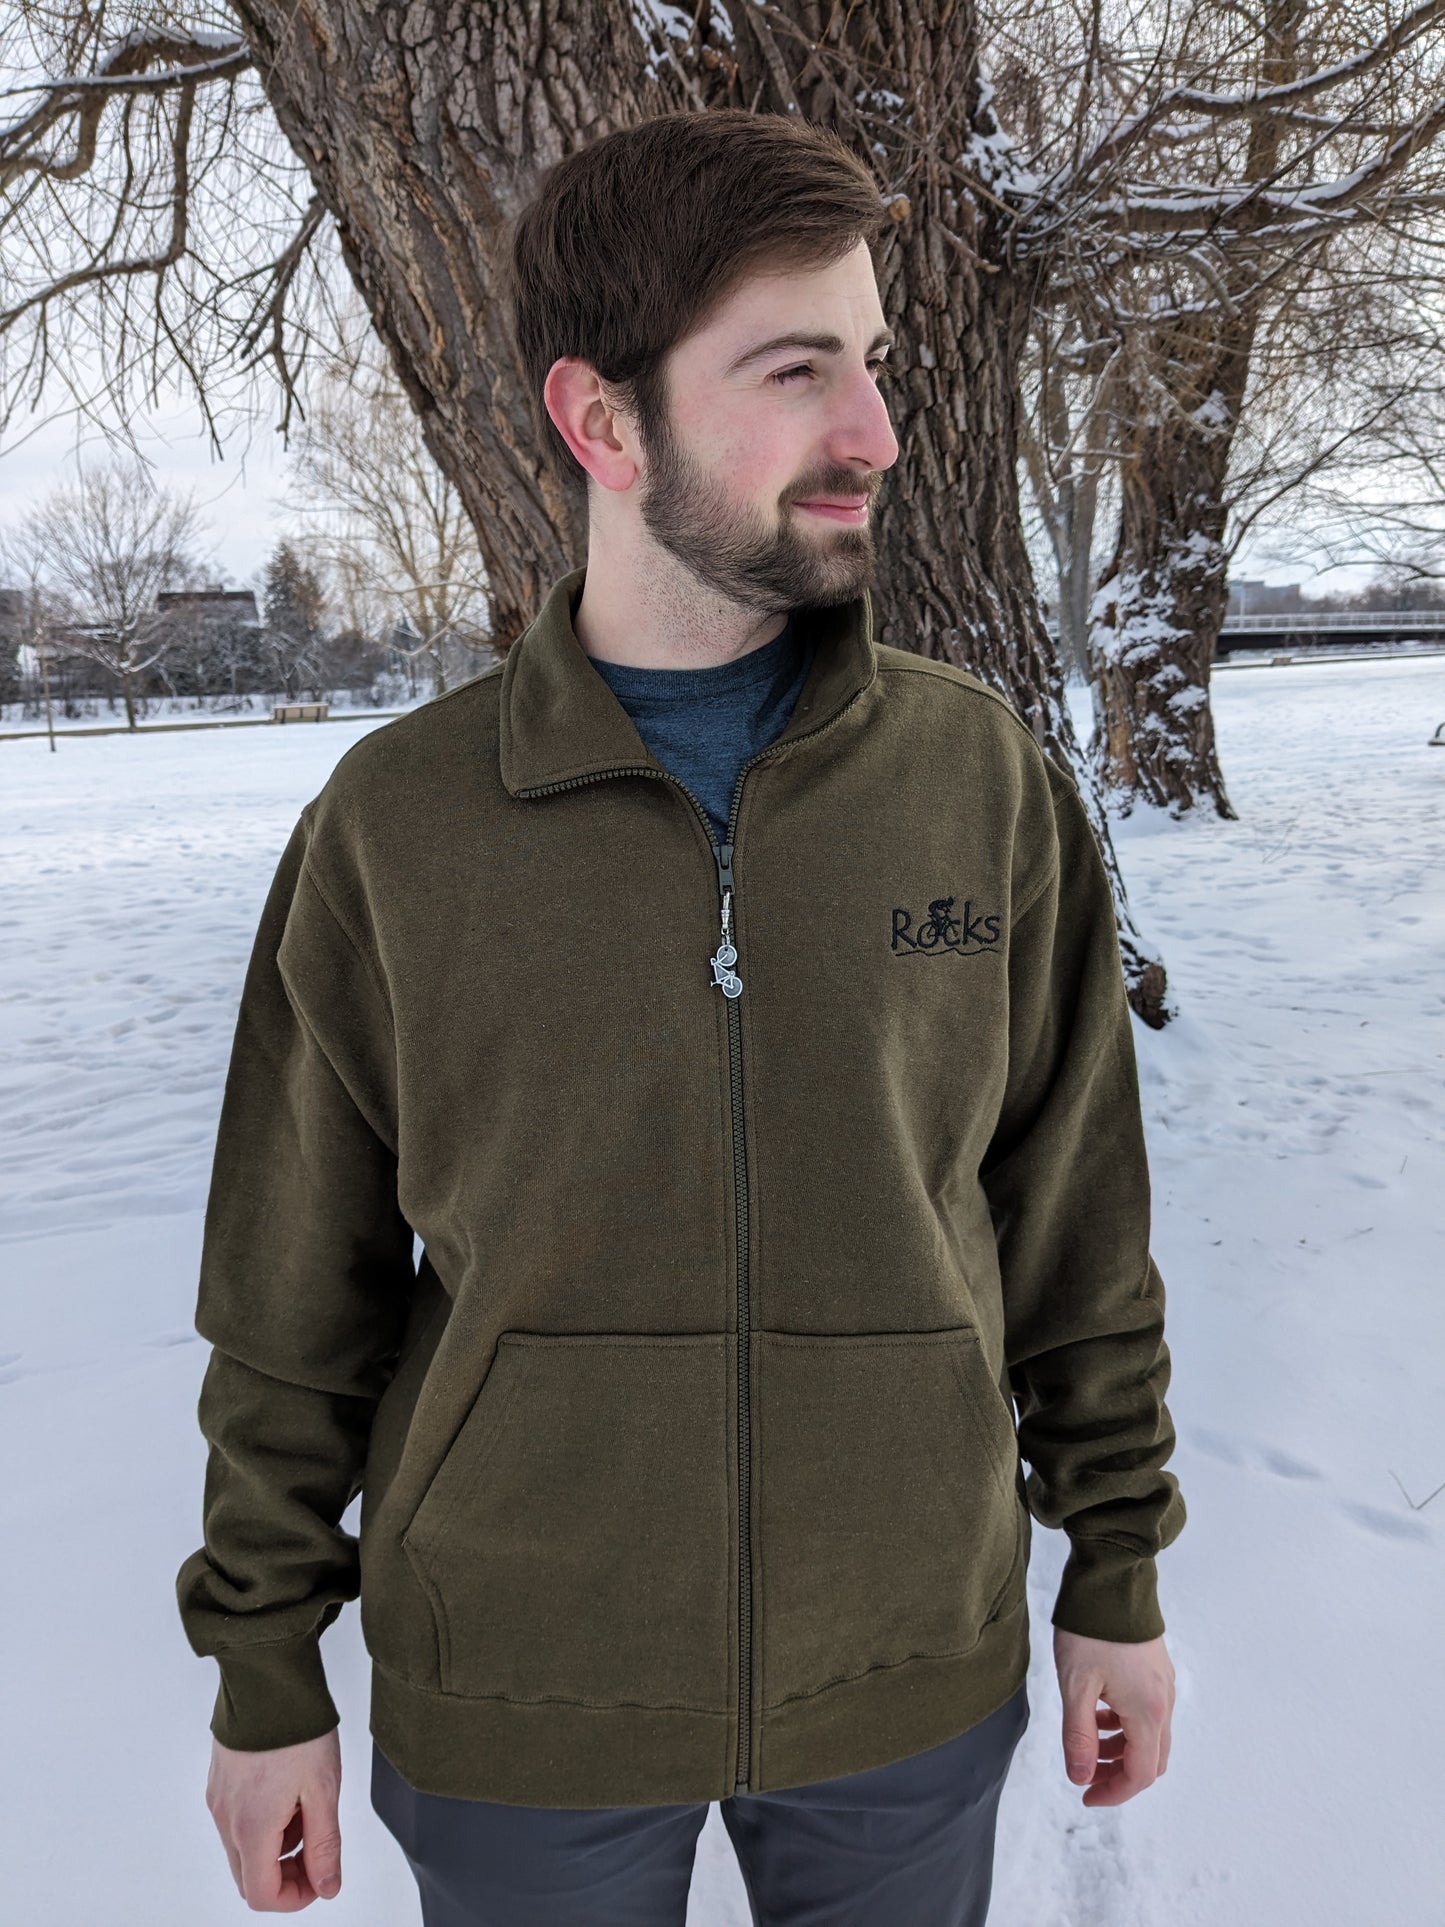 Small Town Natural male model Jonas is wearing an XL sized olive coloured 'Rocks' with cyclist Hemp Track Jacket. This model typically wears a Medium. The XL is to show how a larger size provides that roomy baggy look